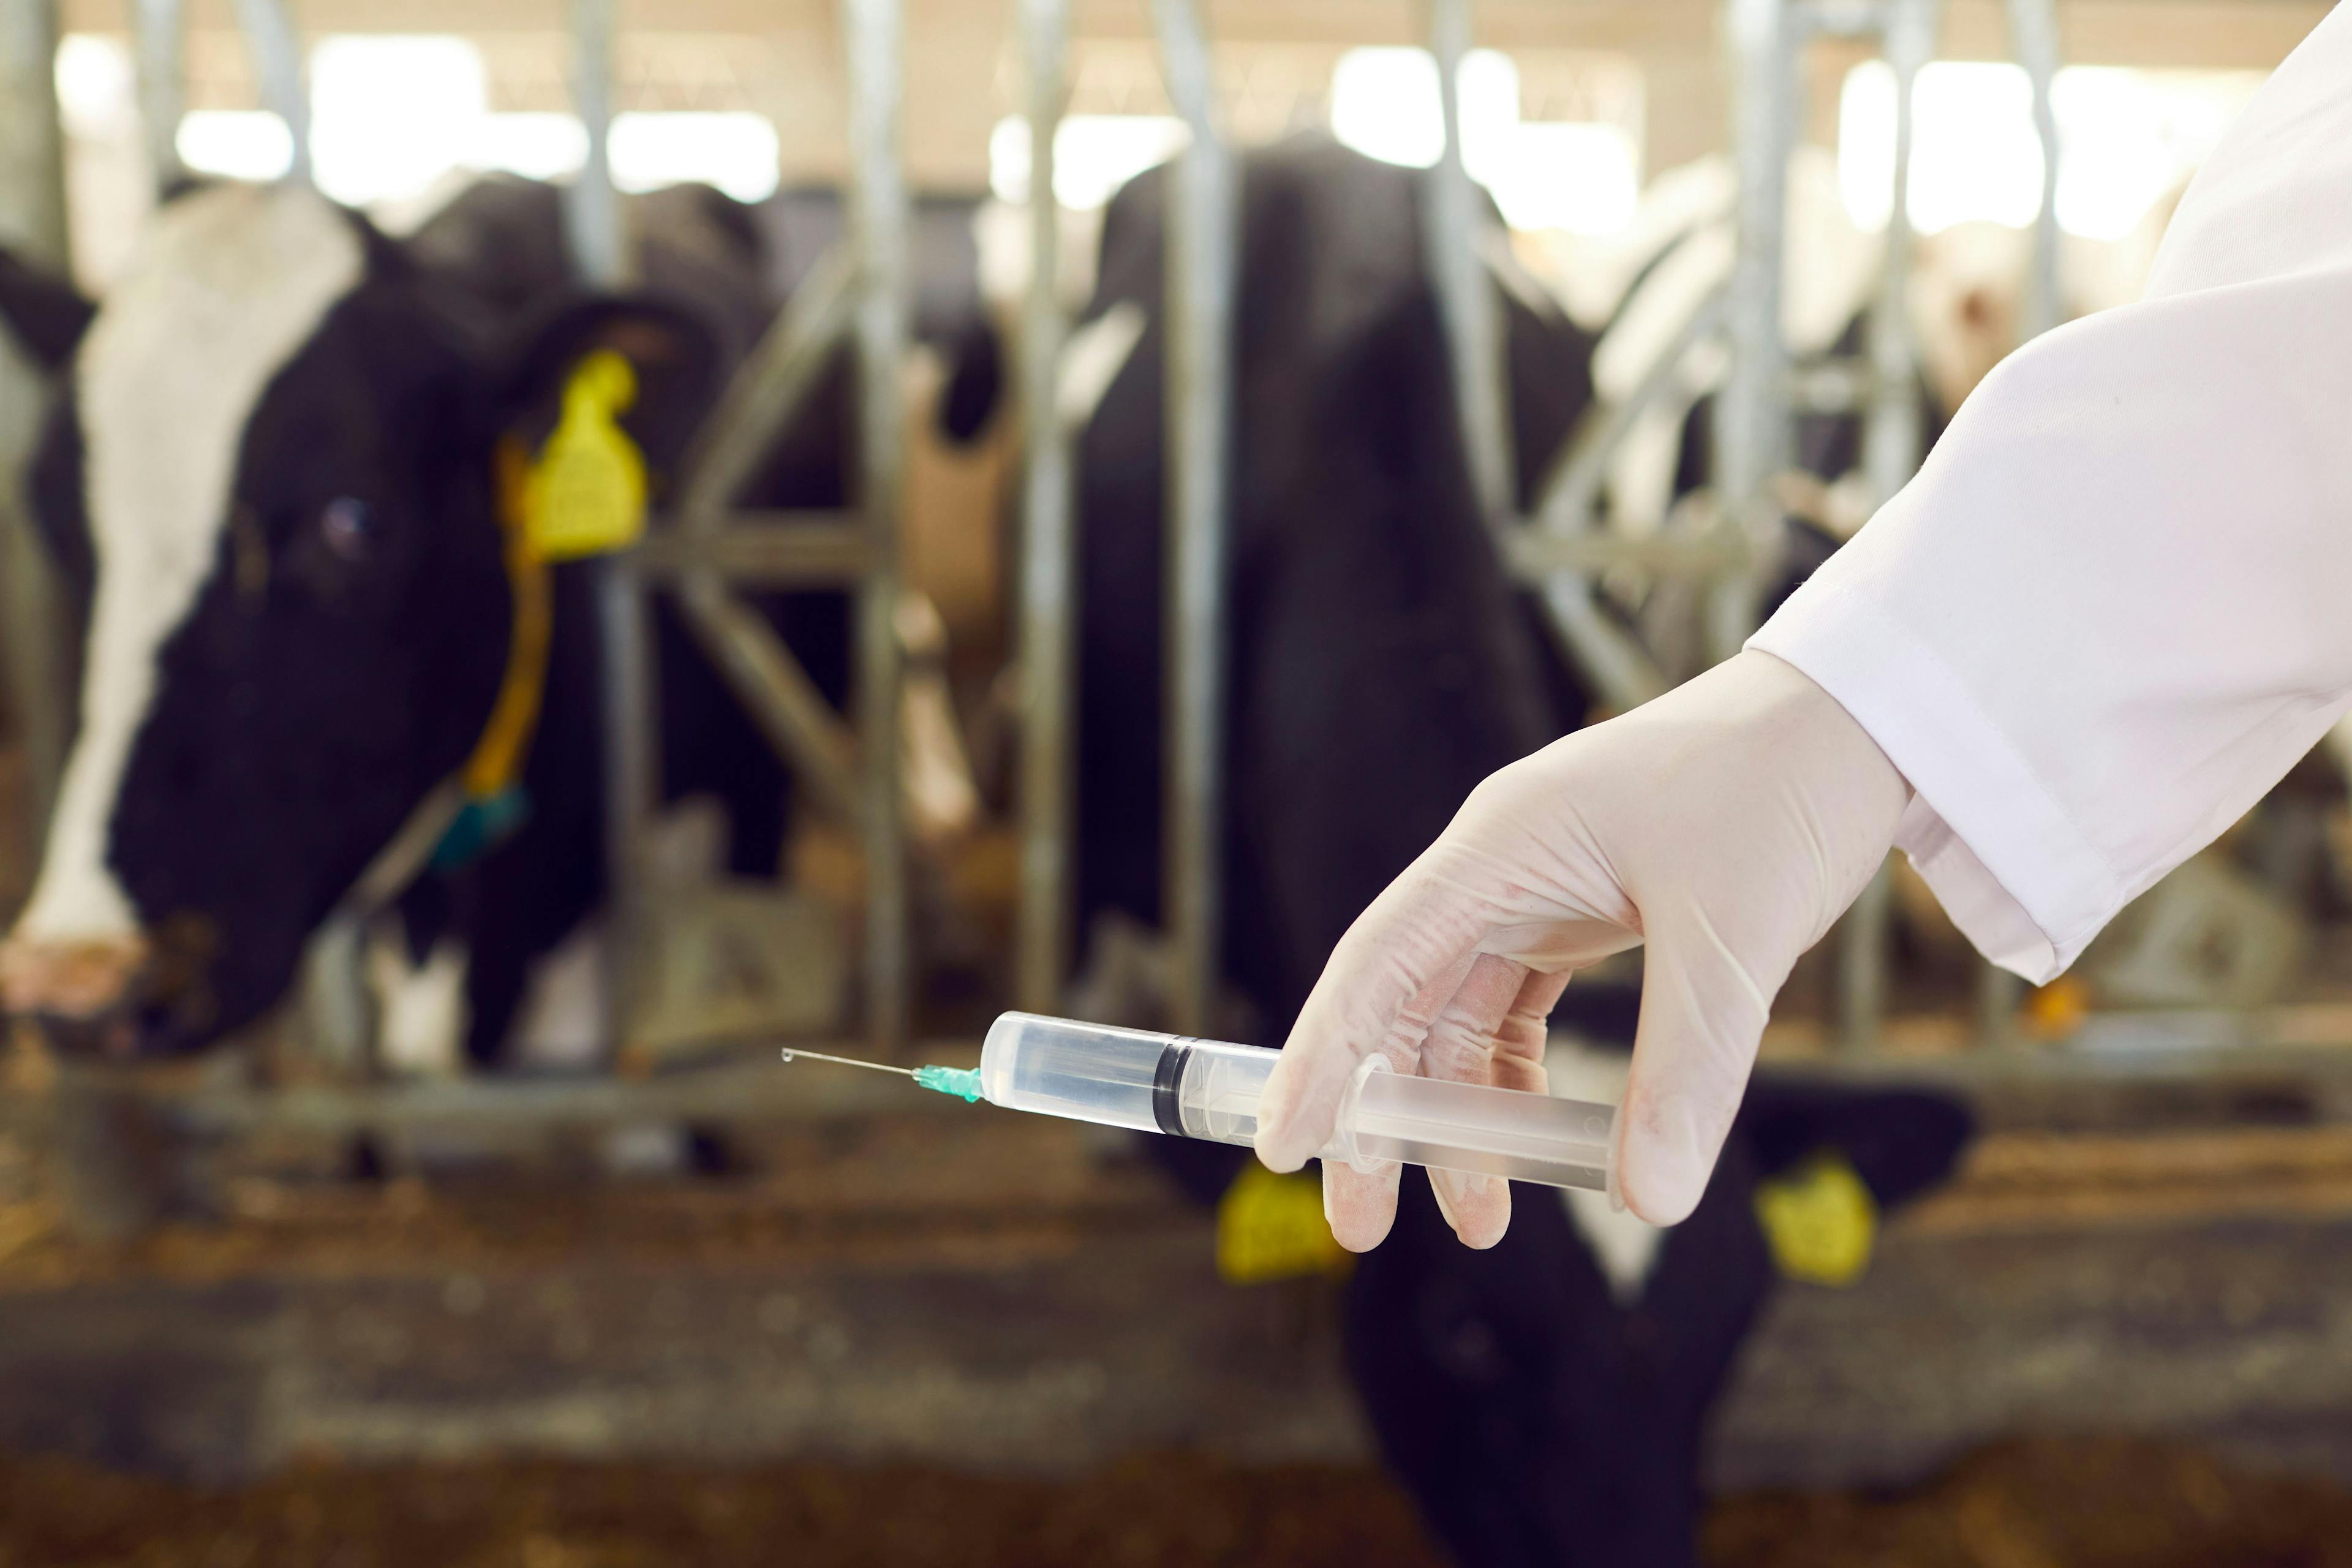 FDA’s new 5-year plan for antimicrobial stewardship in animals is released